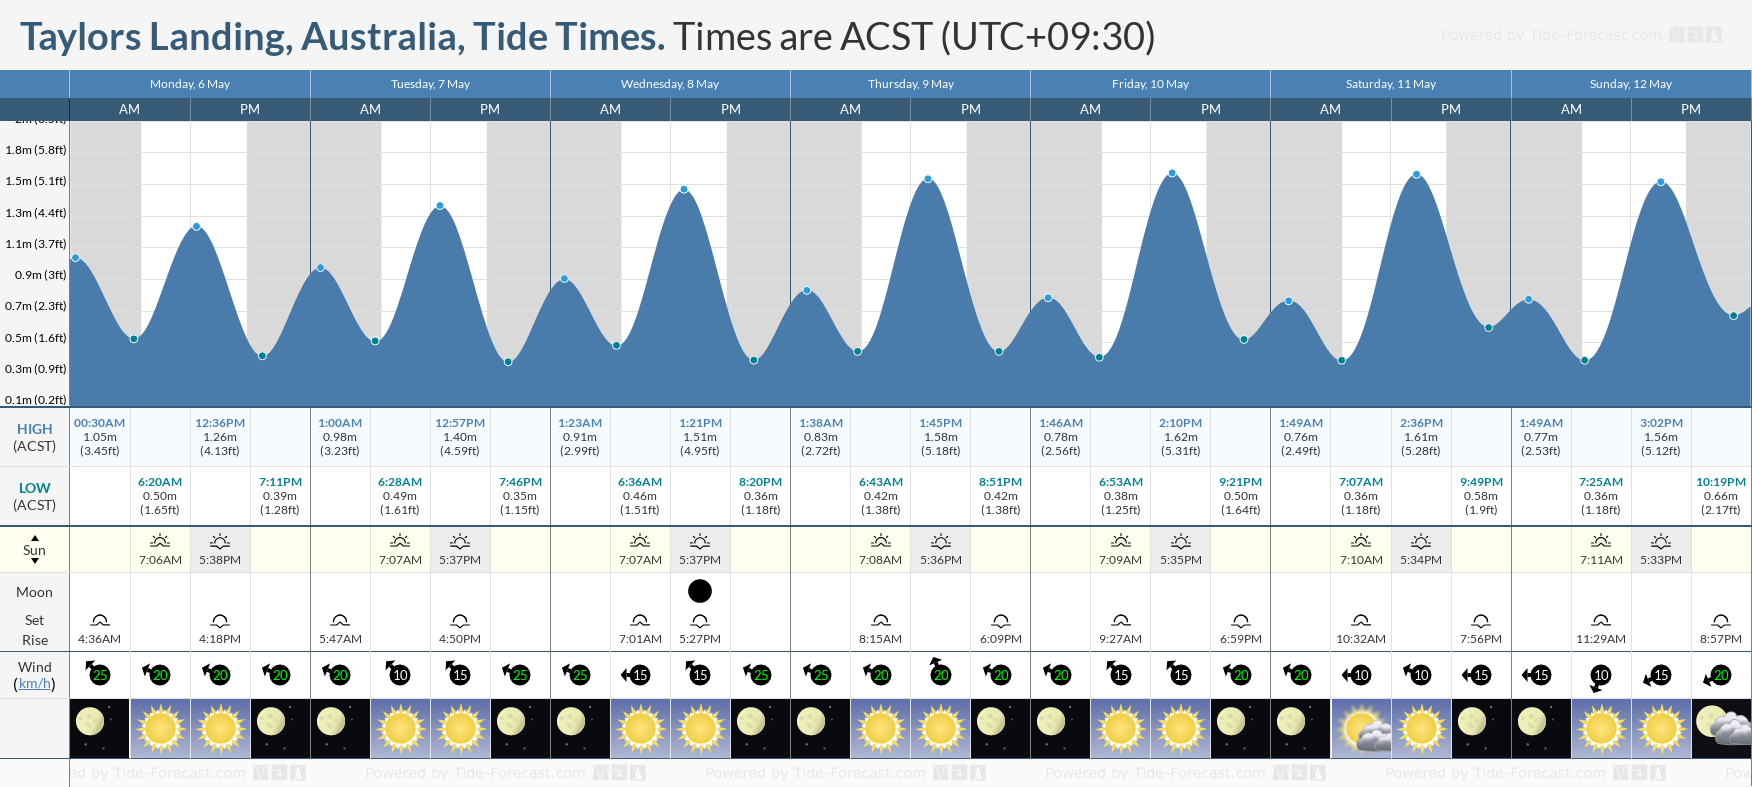 Taylors Landing, Australia Tide Chart including high and low tide tide times for the next 7 days